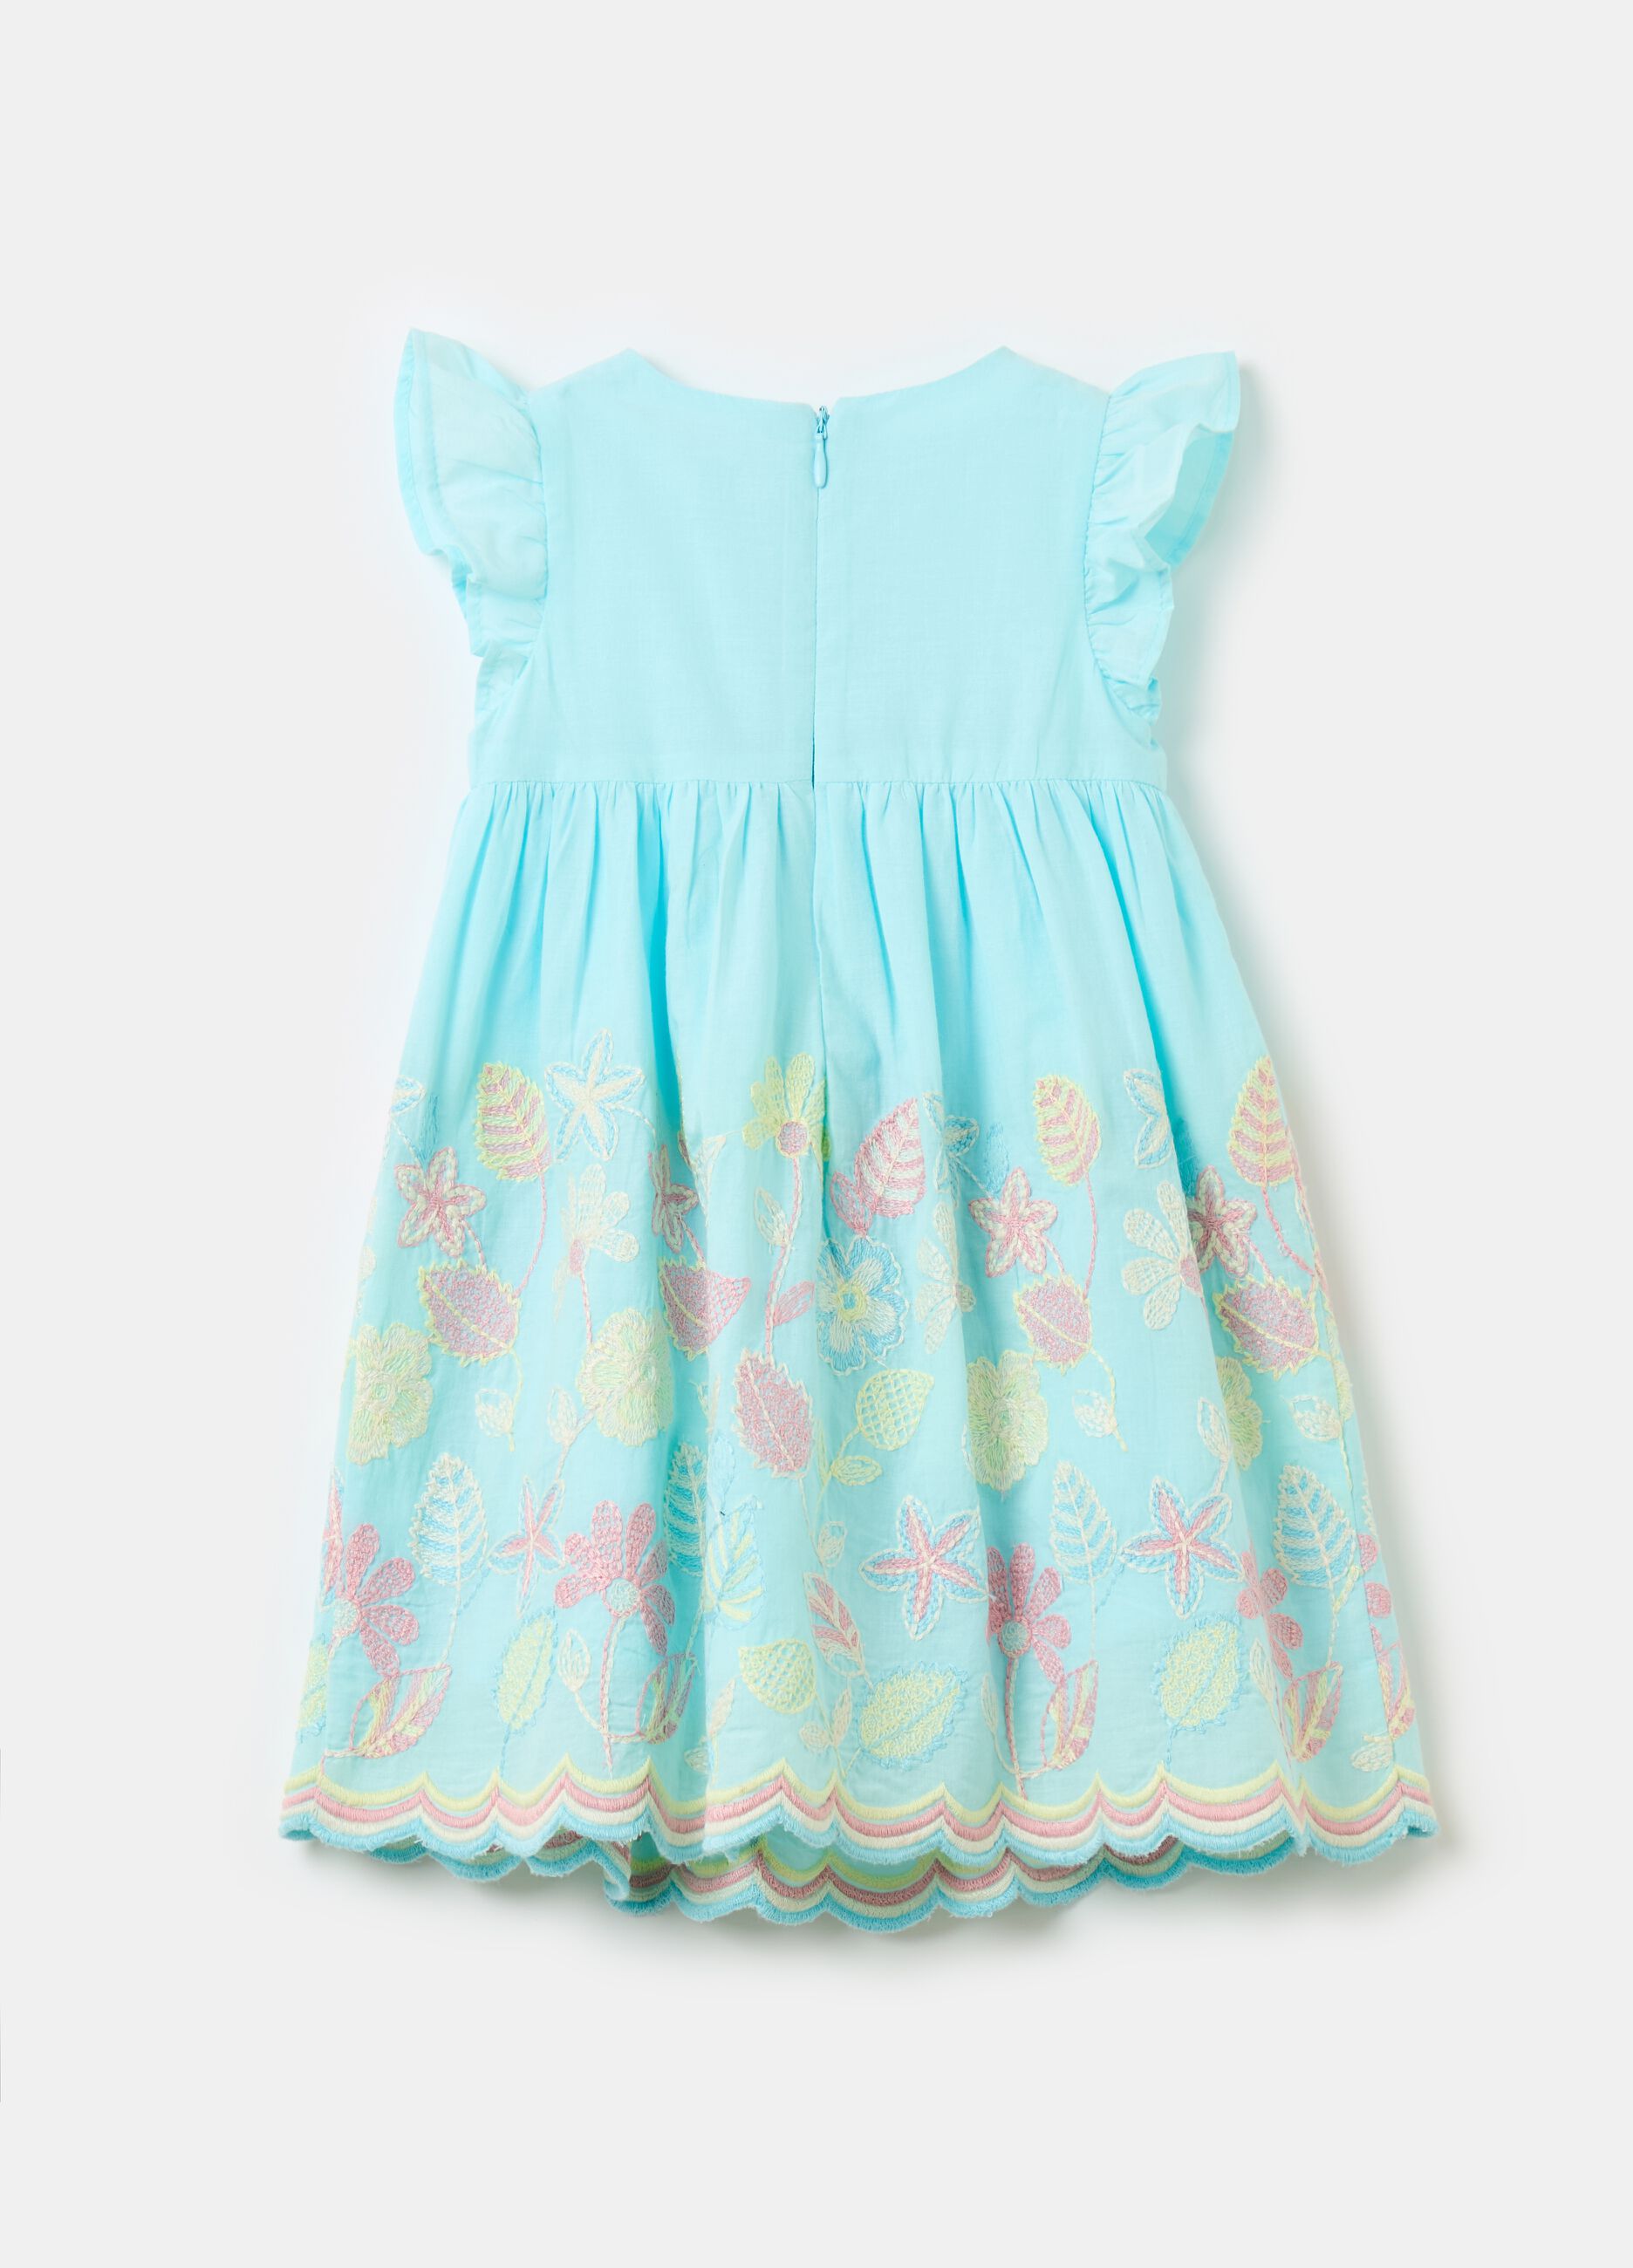 Cotton dress with floral embroidery